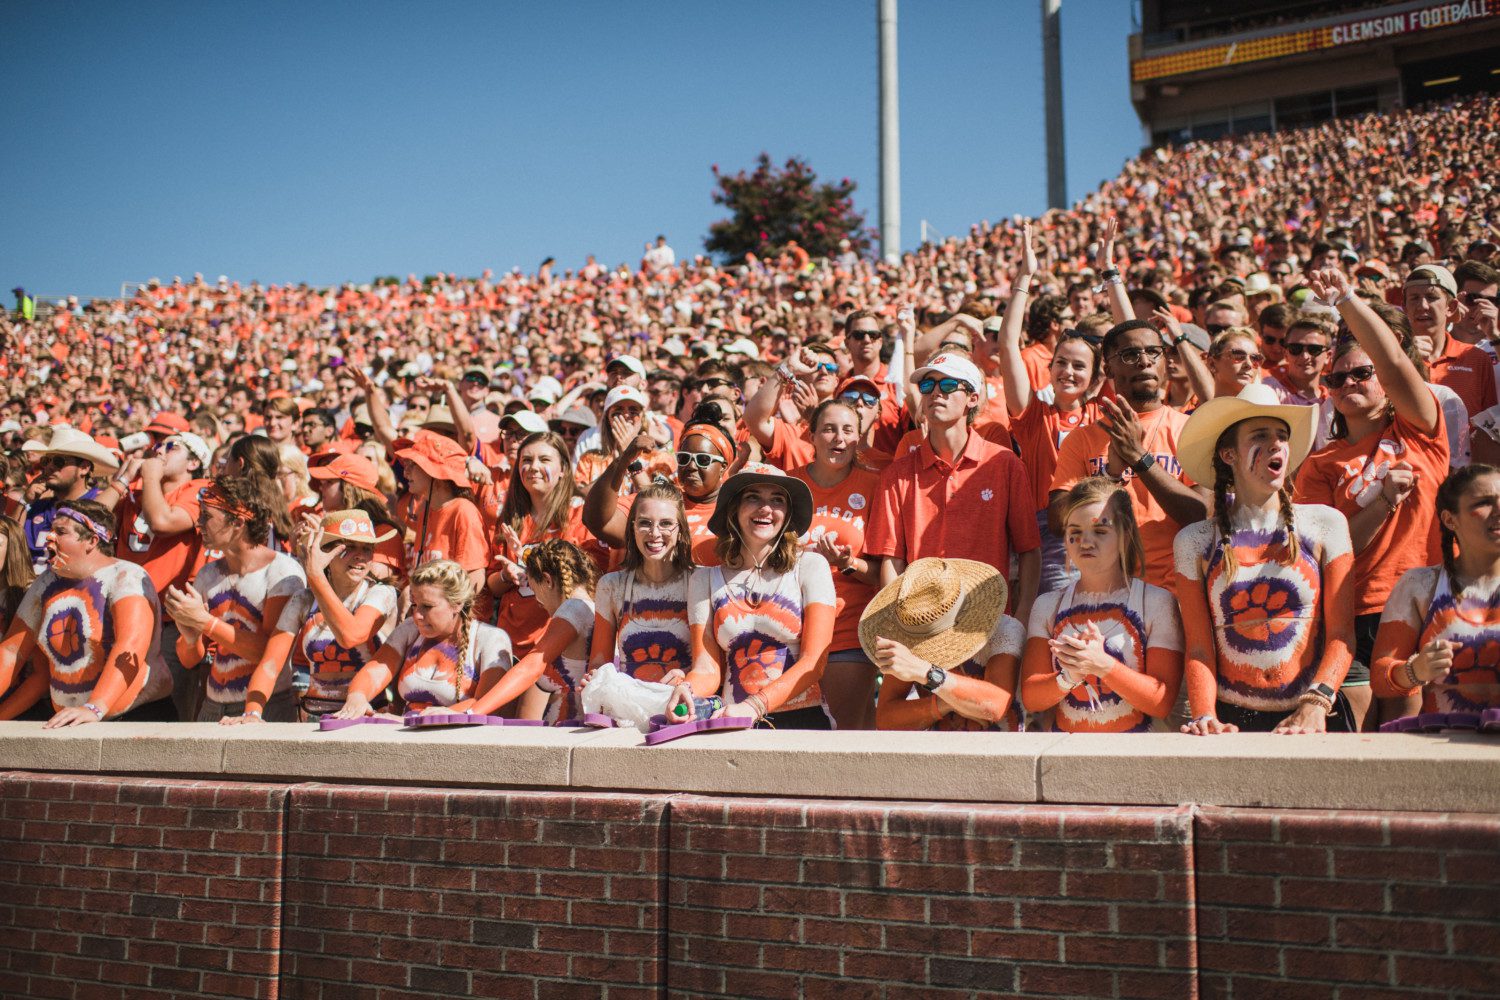 Students cheer on the Tiger football team during Clemson's 24-10 victory over Texas A&M on Sept. 7, 2019